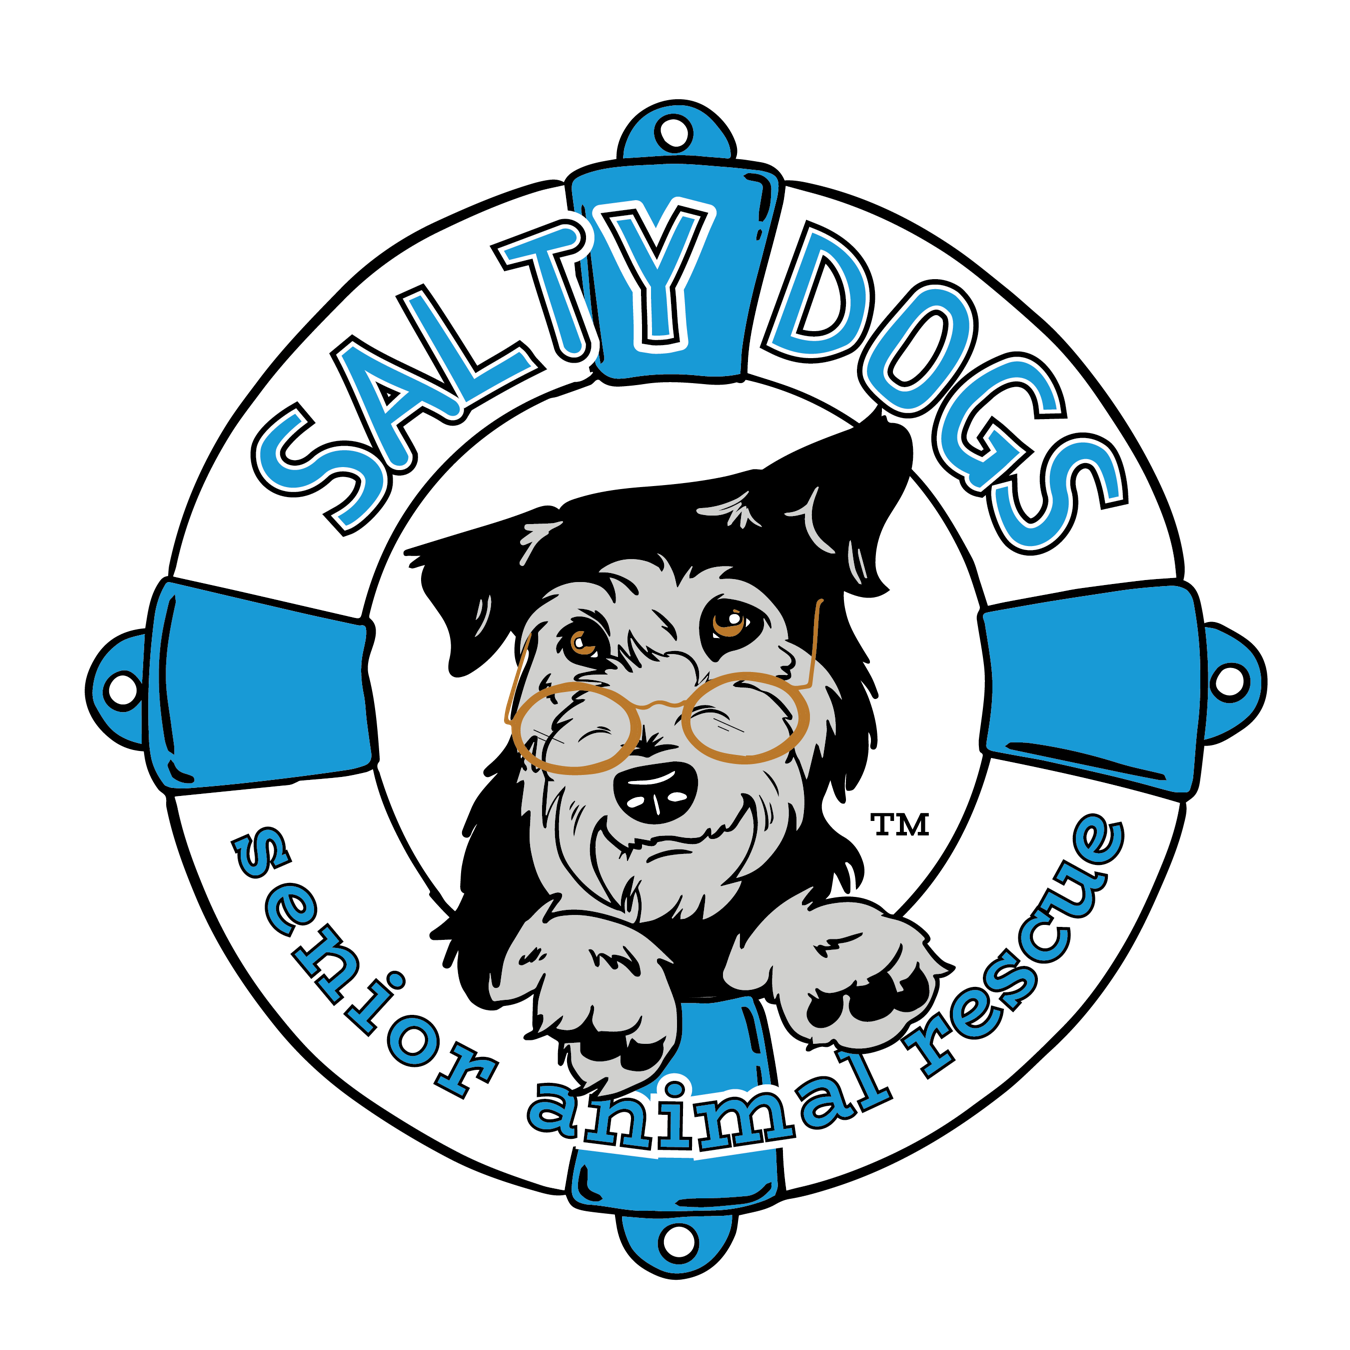 A logo for salty dogs senior animal rescue